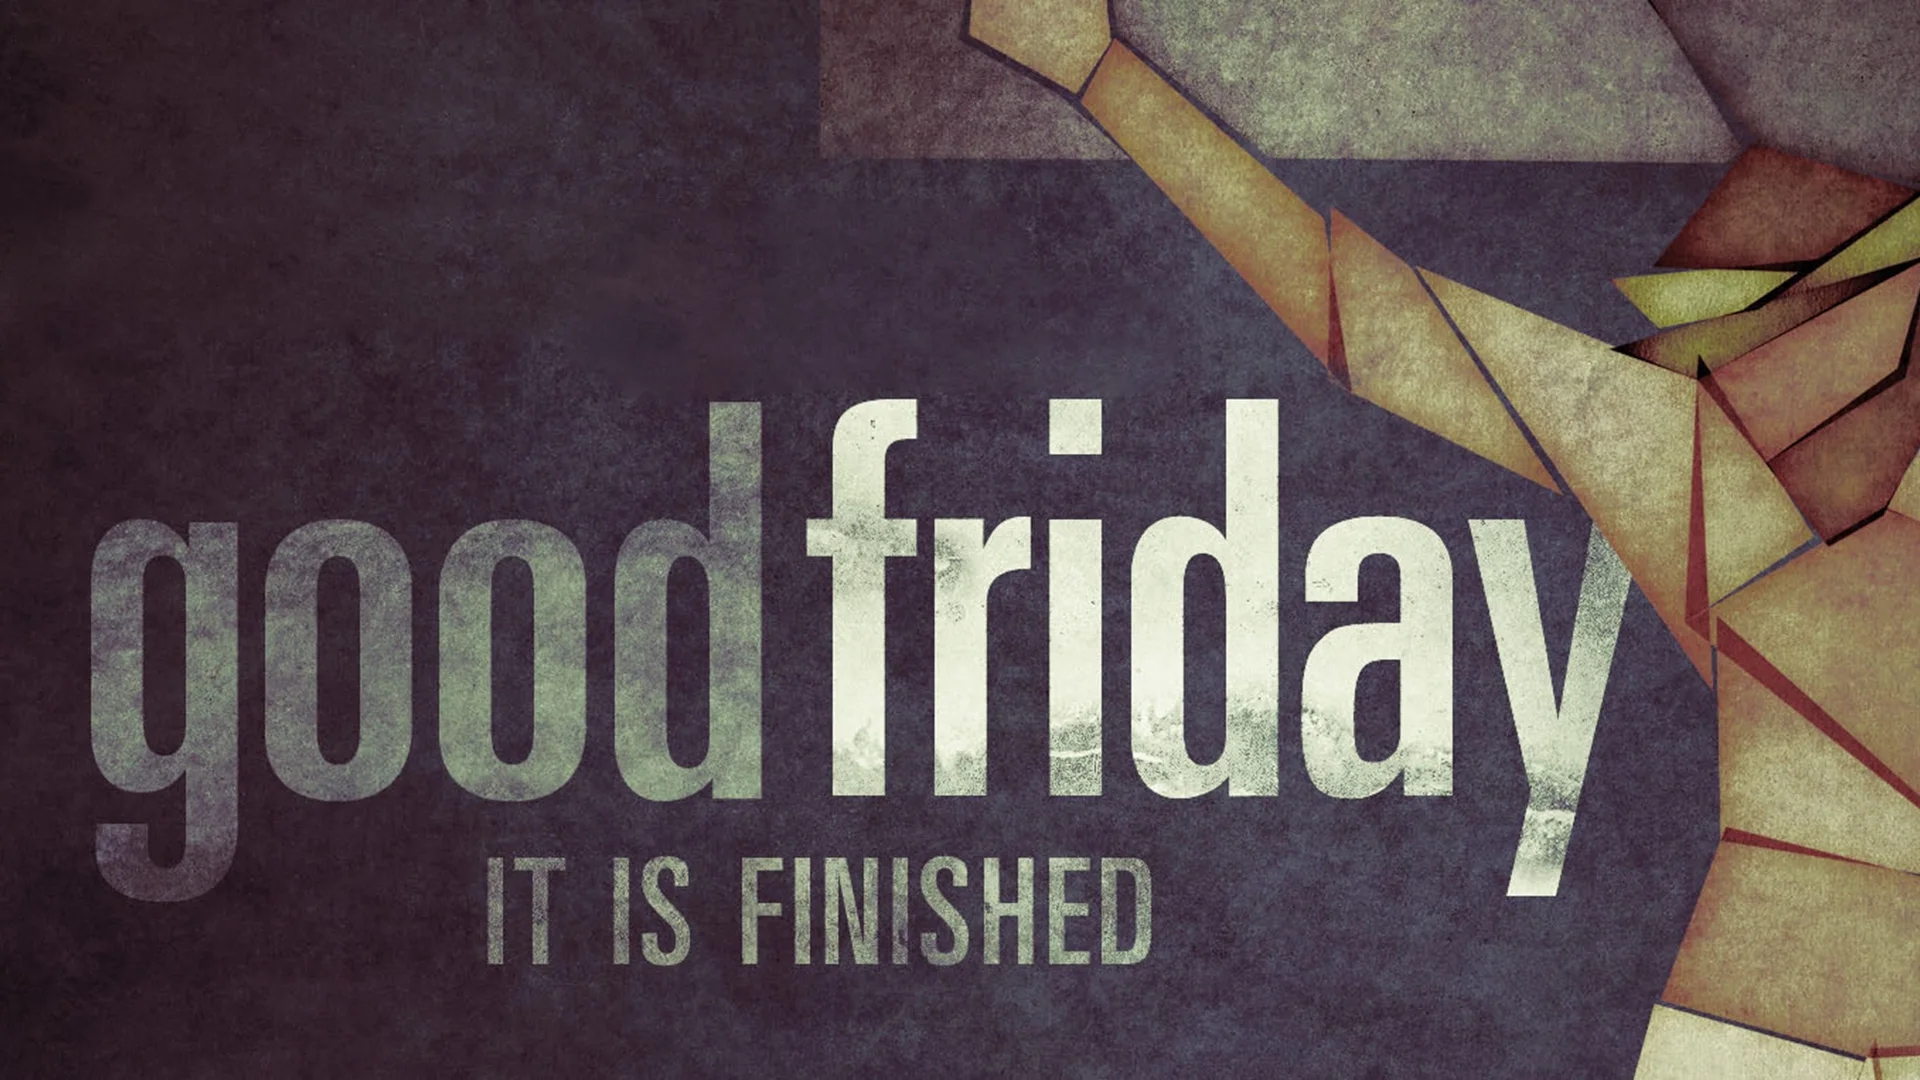 Good Friday: It Is Finished